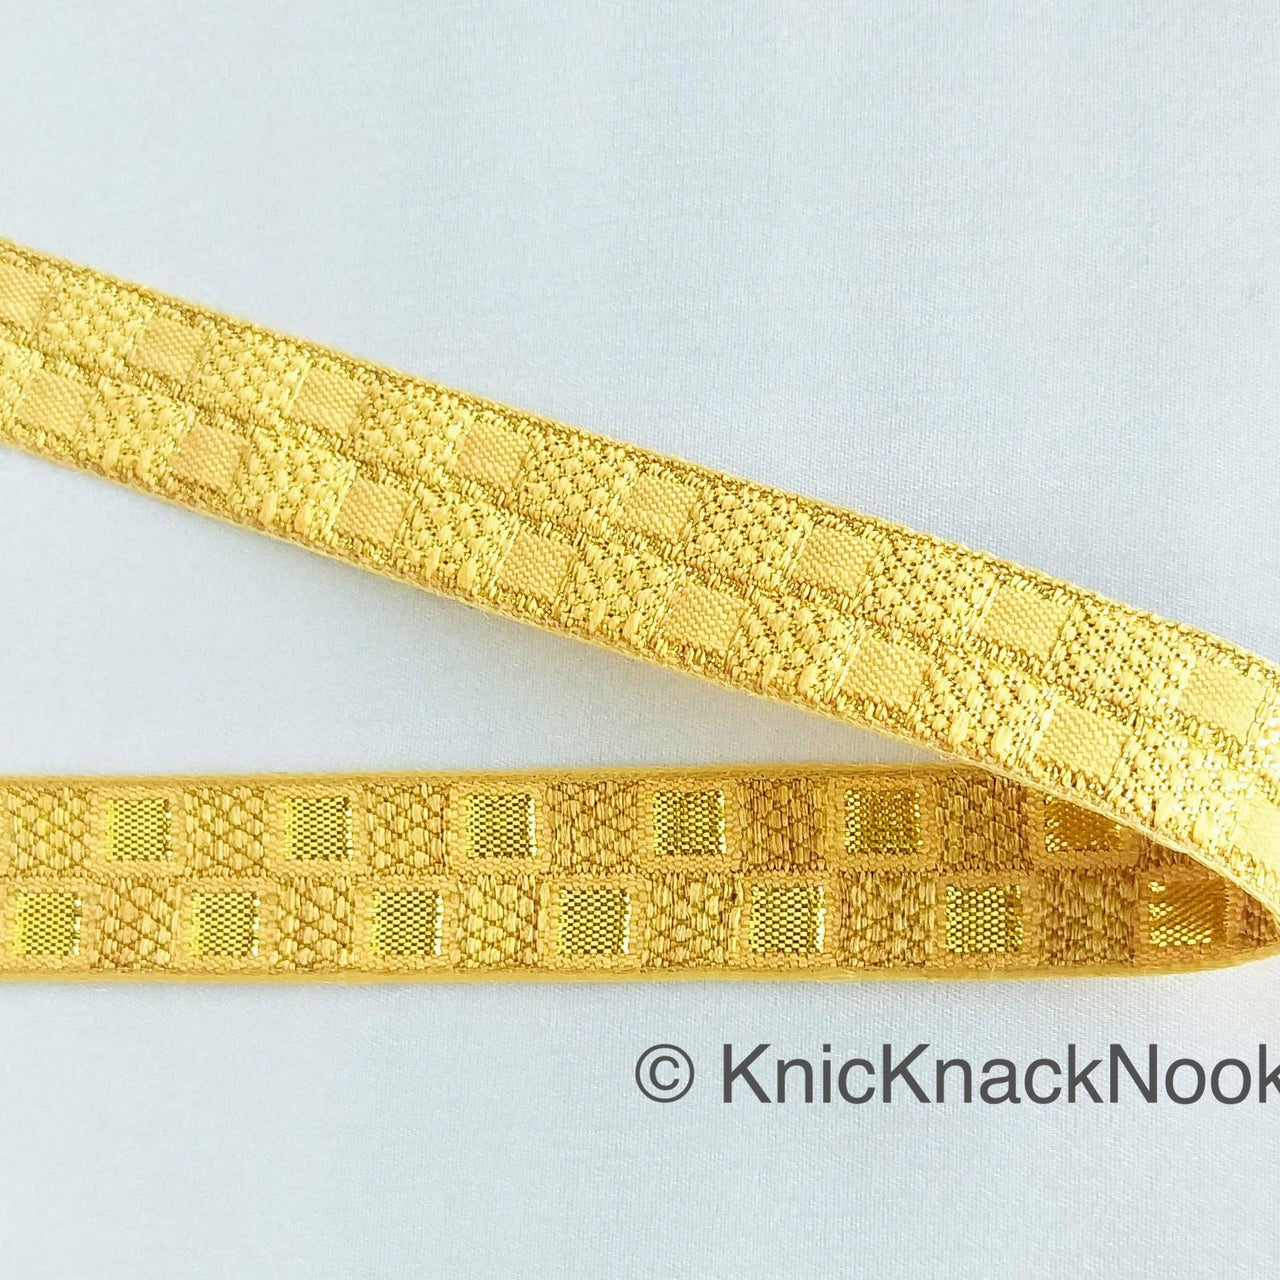 Beige and Gold Jacquard Weaving Trim, Trim By 2 Yards, Craft Decorative Ribbon